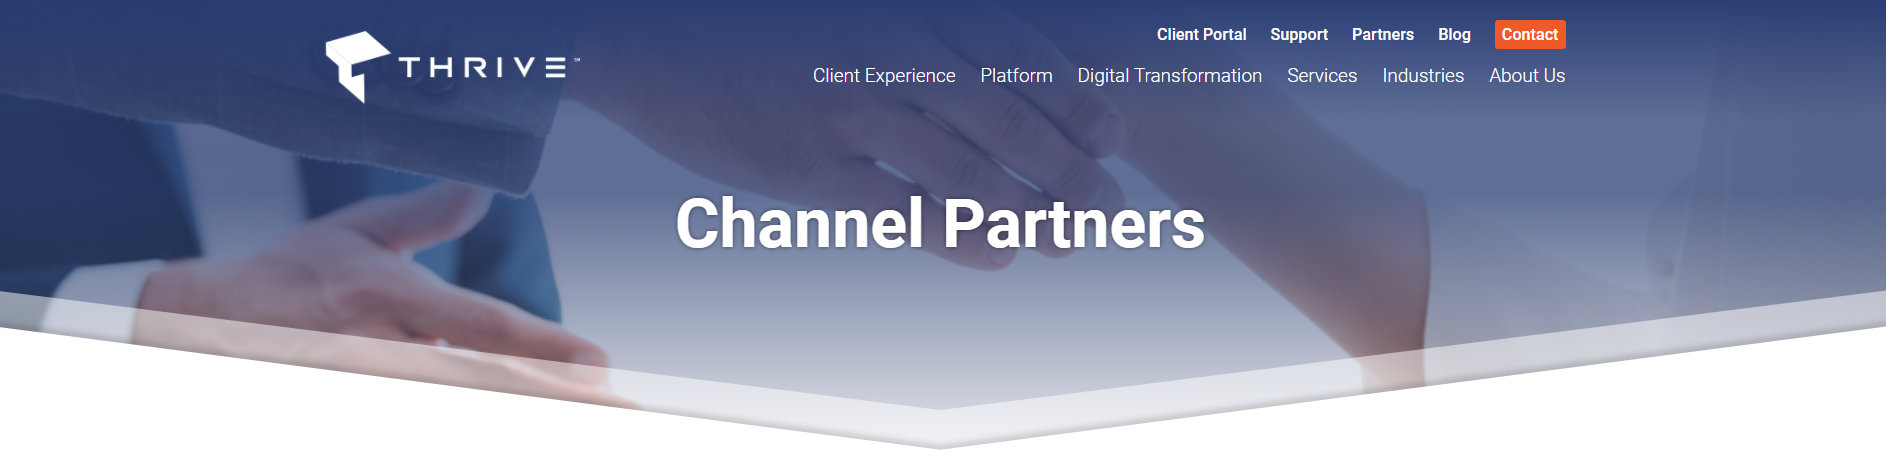 Channel Partners Header-2